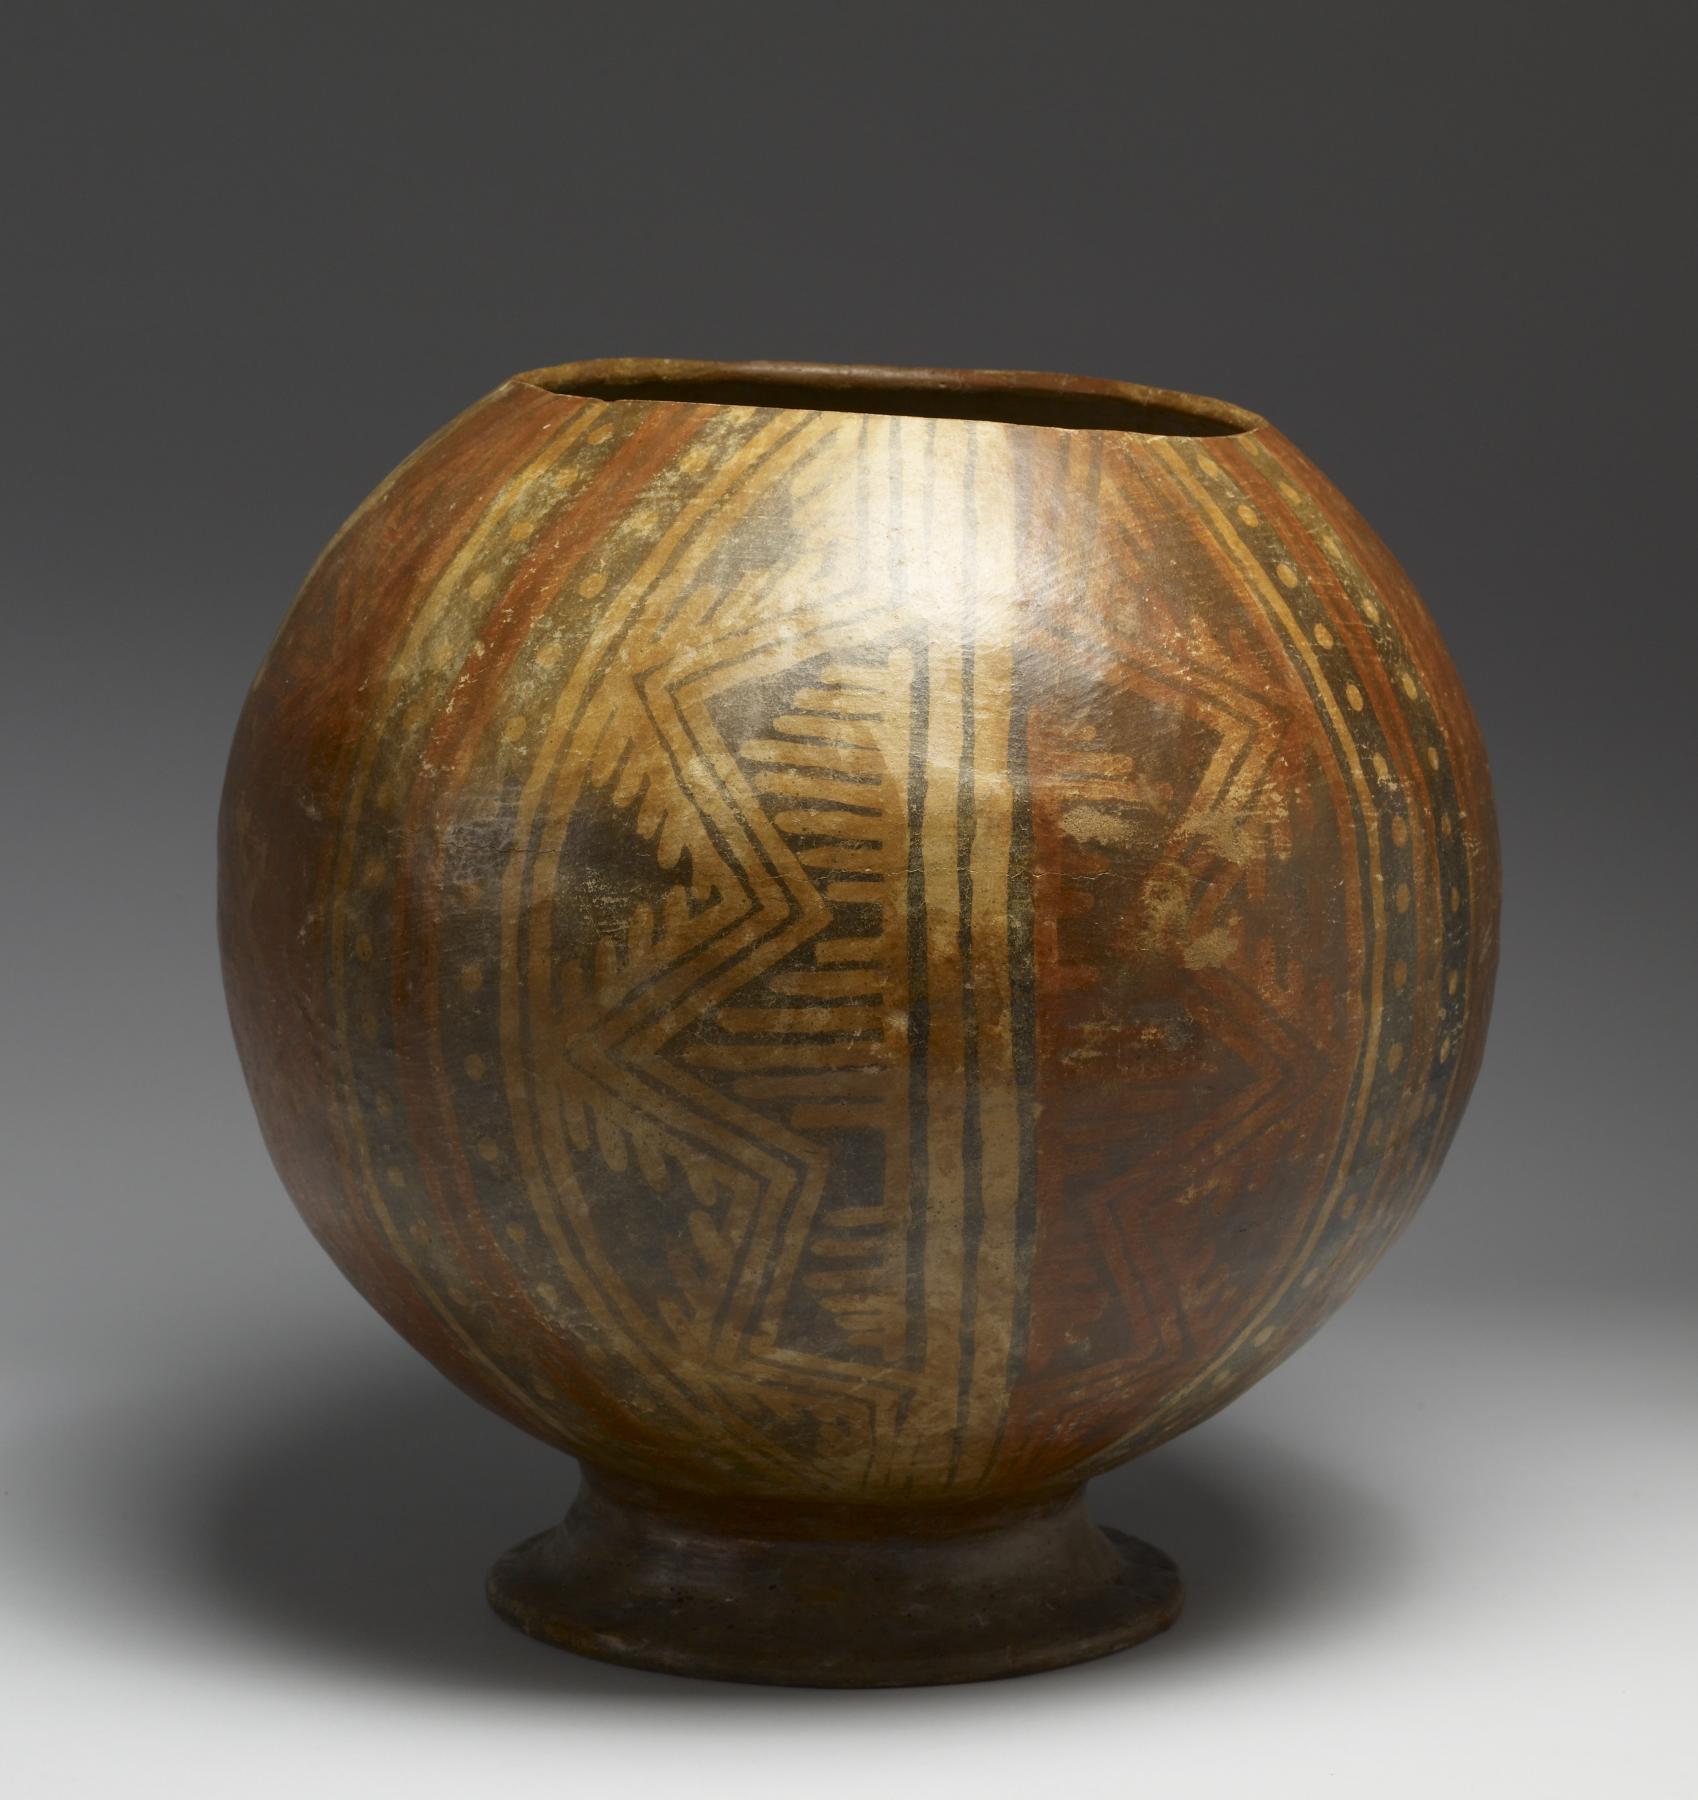 Image for Spherical Vessel "Olla"